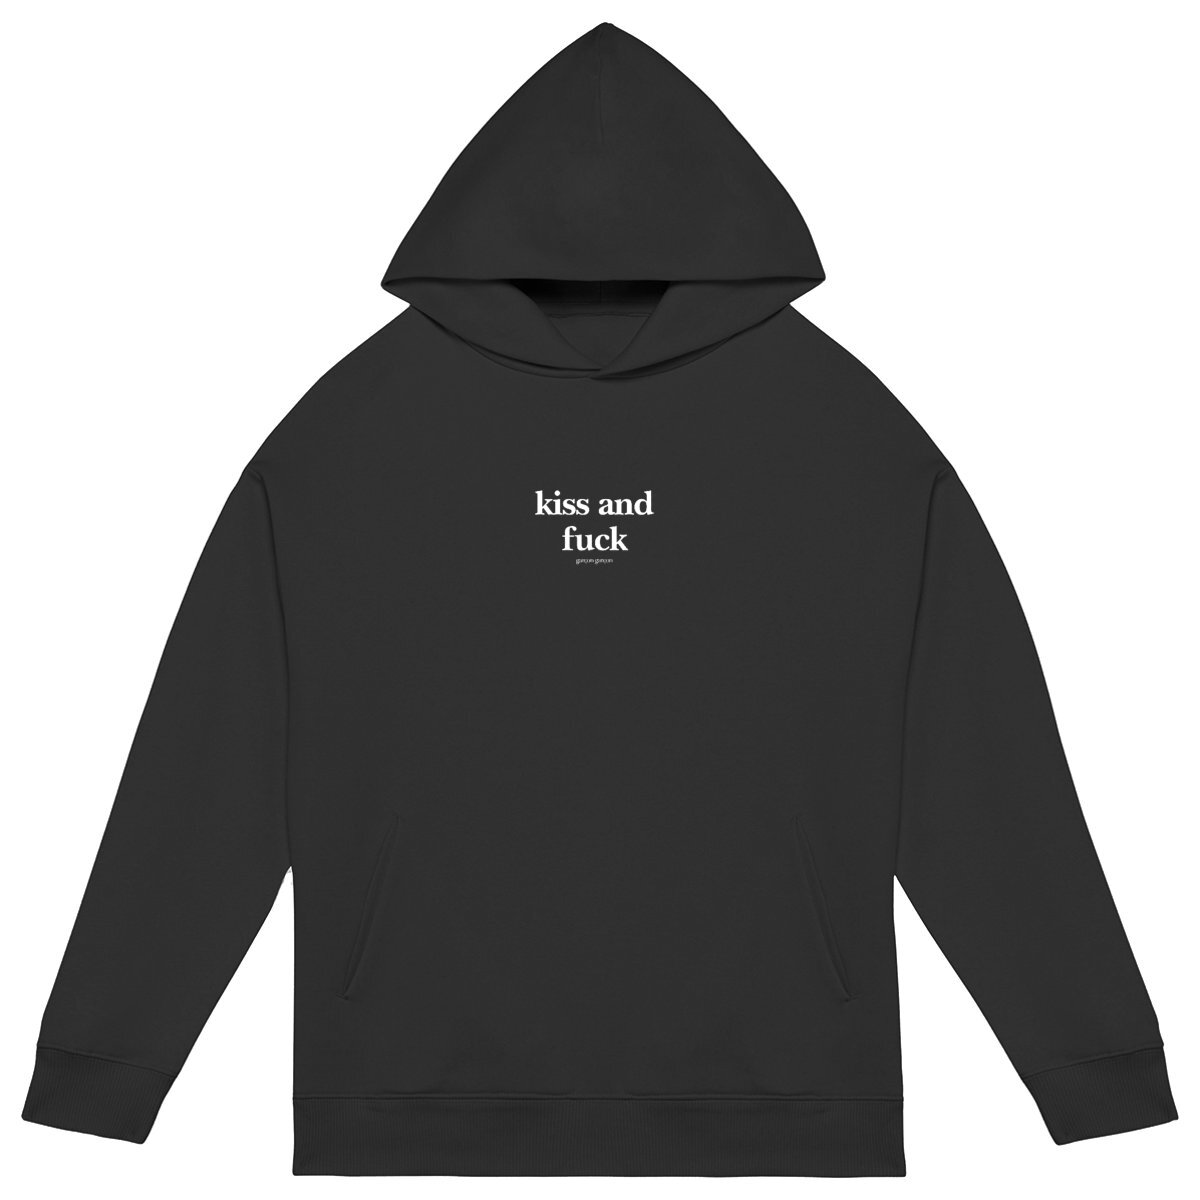 kiss and fuck hoodie over. cigarette after sex hoodie over. garçon garçon essentiel oversized hoodie. Sleek in black and whispering Parisian chic, this hoodie is the sartorial whisper of 'garçon garçon' — a statement of understated elegance. Perfect for those who carry a piece of Paris in their hearts and a touch of audacity on their sleeves.